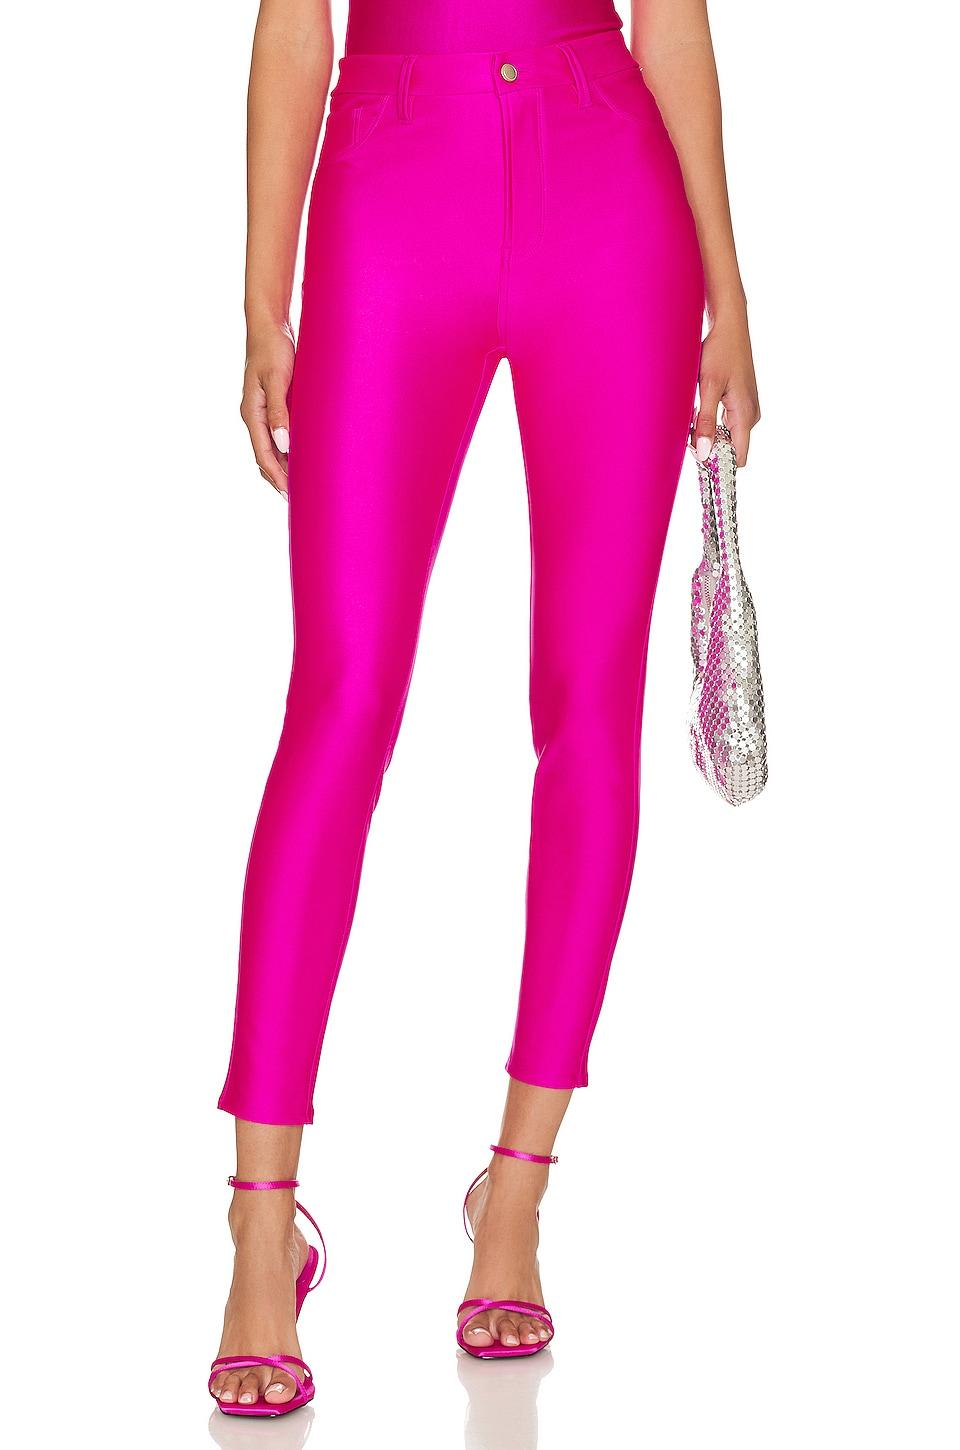 YRRETY Shiny Pink PU Reflective Mirror Faux Patent Leather Leggings For  Women Sexy Low Waist Trousers With Push Up, Zipper Closure, Perfect For  Club Parties And Special Occasions From Peanutoil, $17.75 |